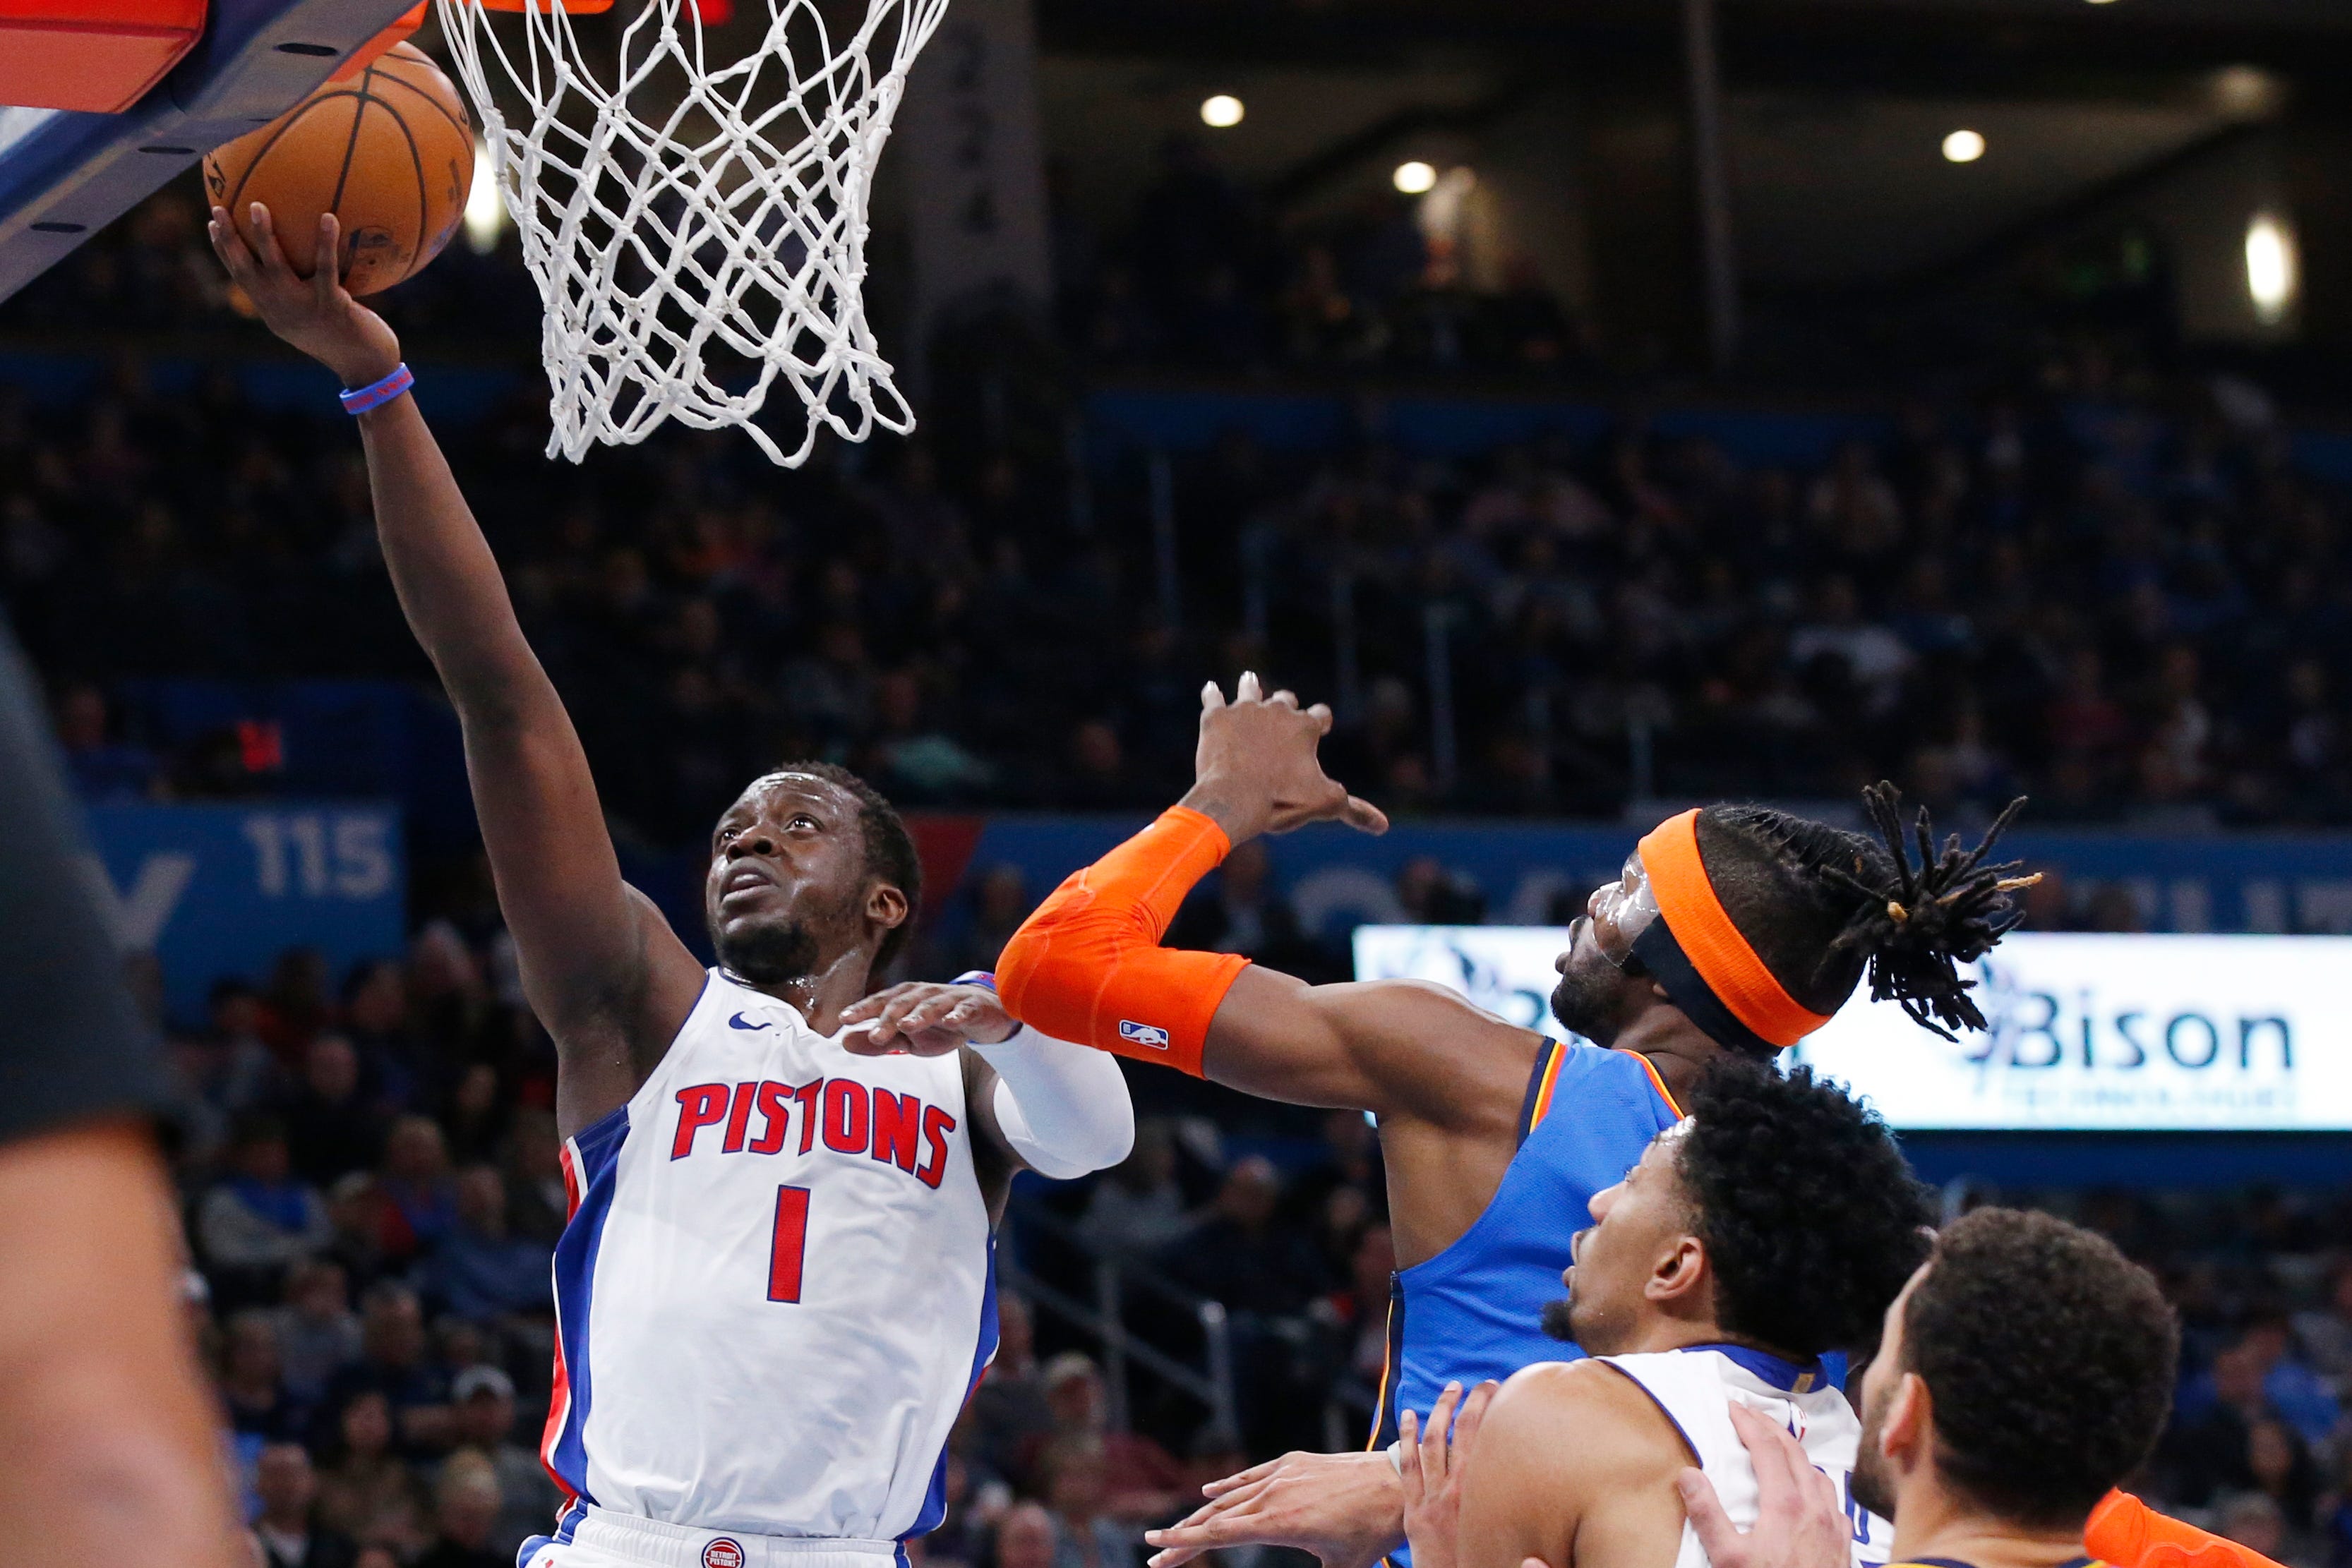 Pistons guard Reggie Jackson (1) shoots in front of Oklahoma City Thunder center Nerlens Noel, right, during Friday's game.